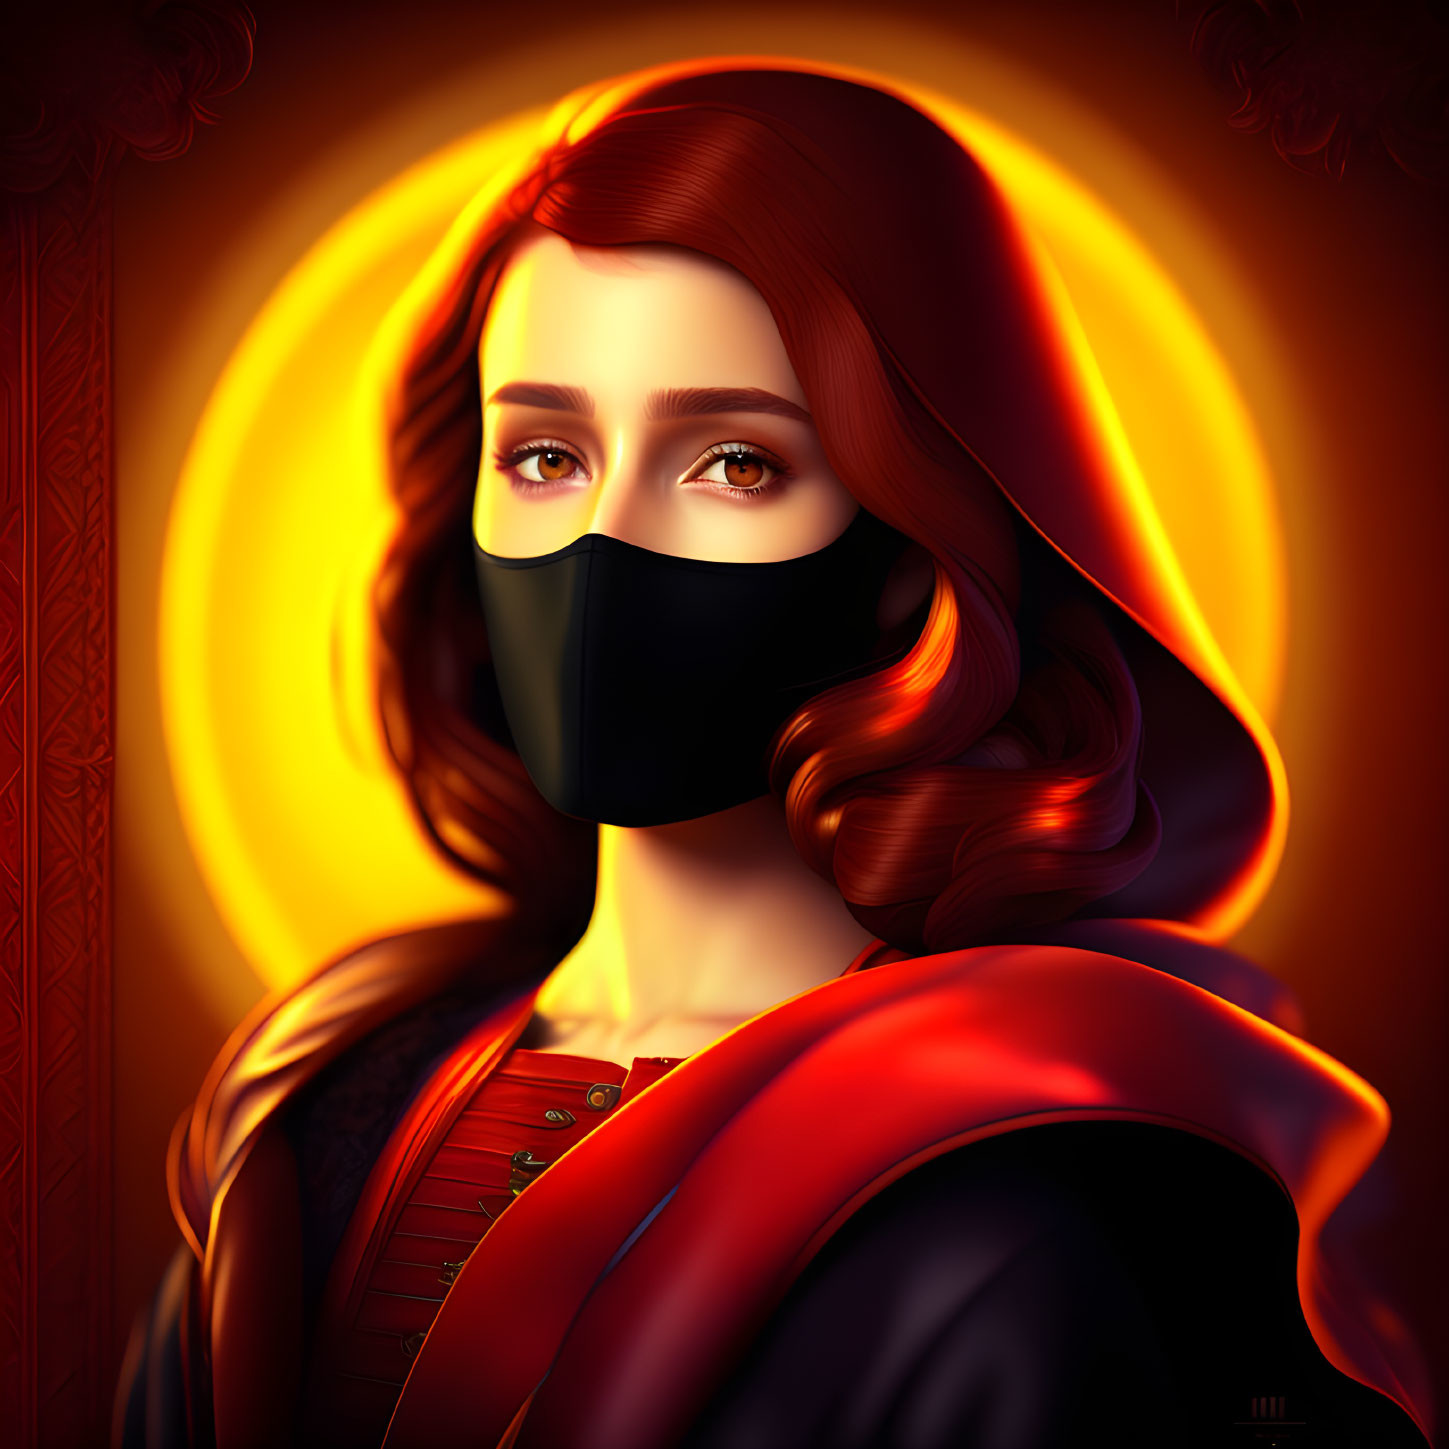 Stylized portrait of woman with red hair wearing mask on golden backdrop